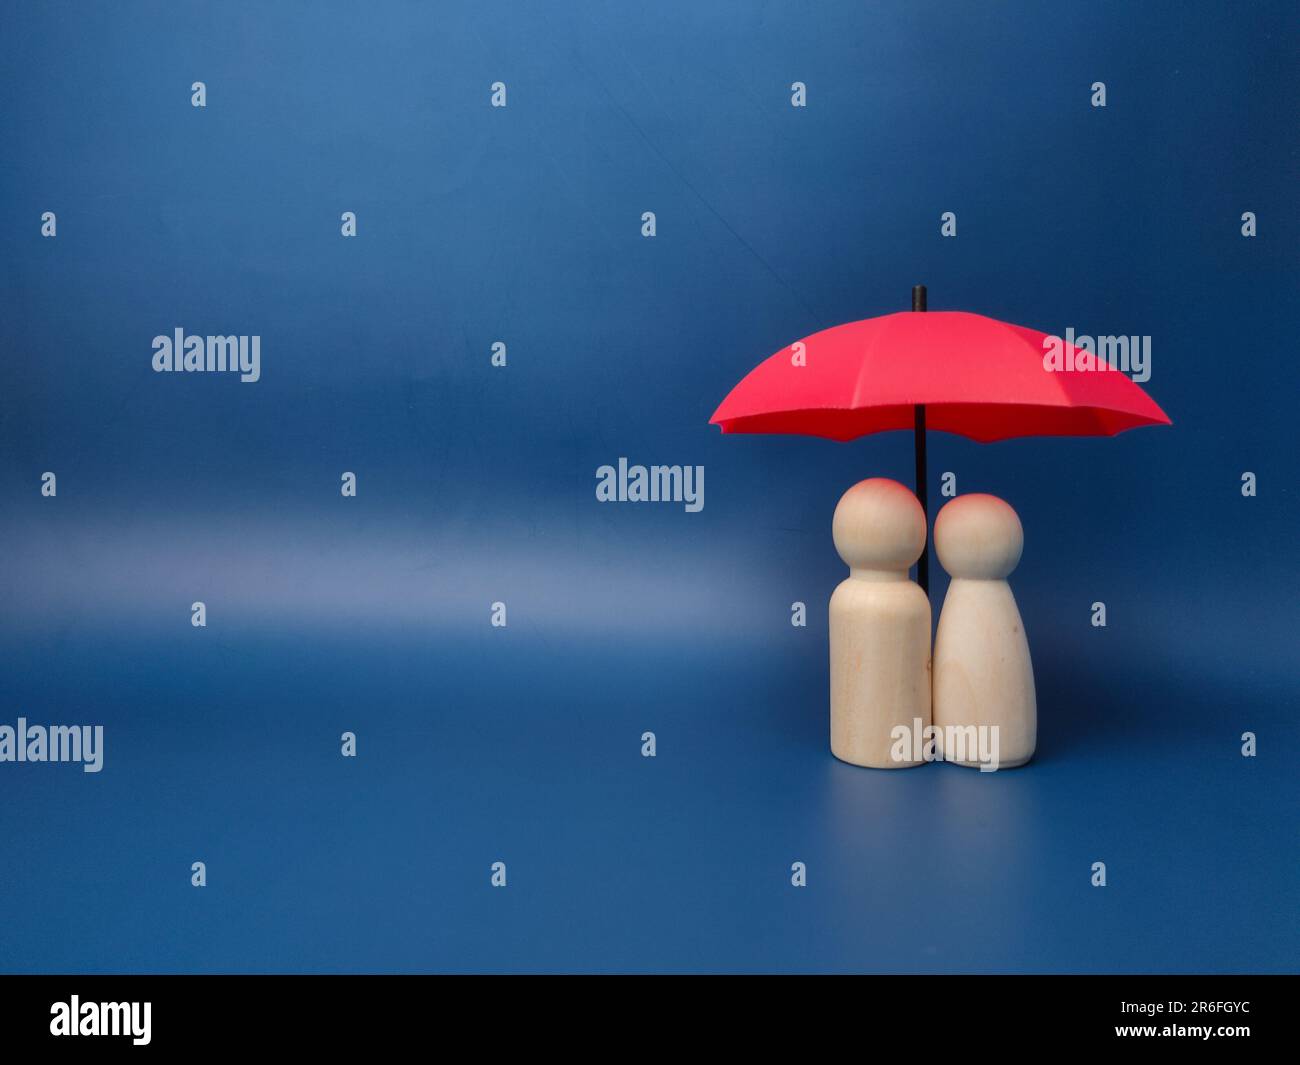 Two figures standing beneath a red umbrella on a blue background Stock Photo